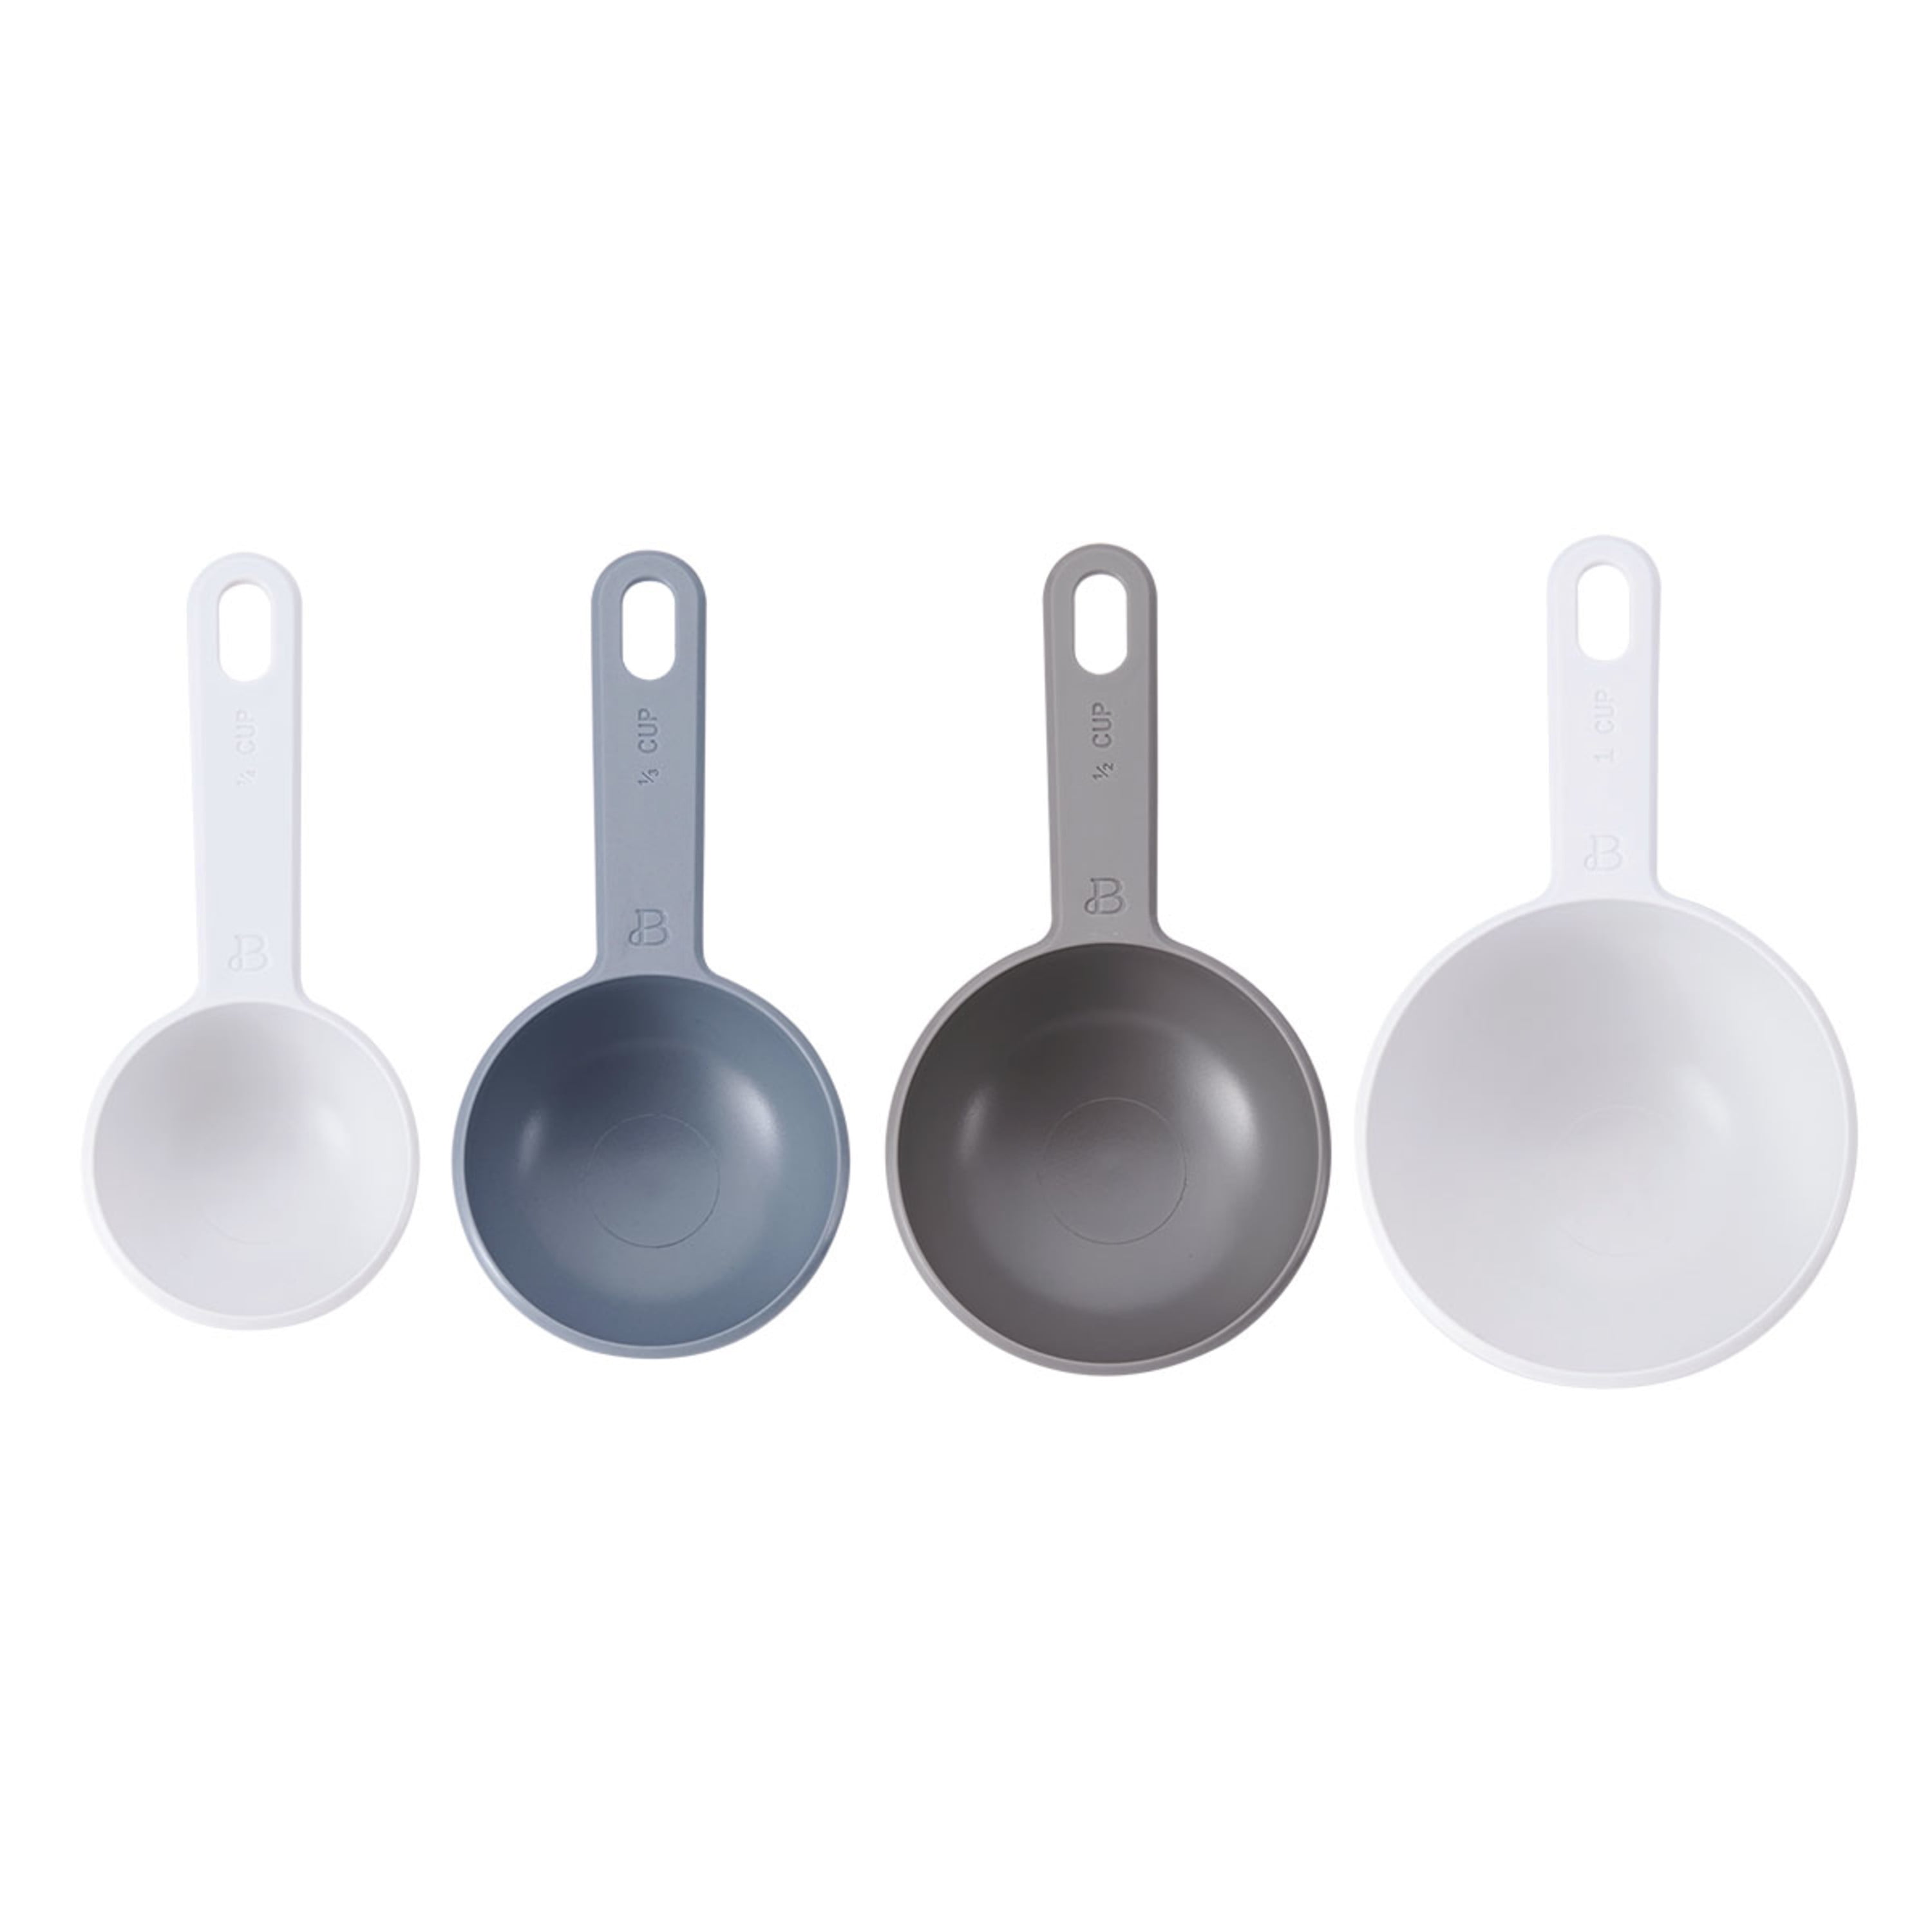 Beautiful Nesting Measuring Cups with Ring in Assorted Colors by Drew Barrymore